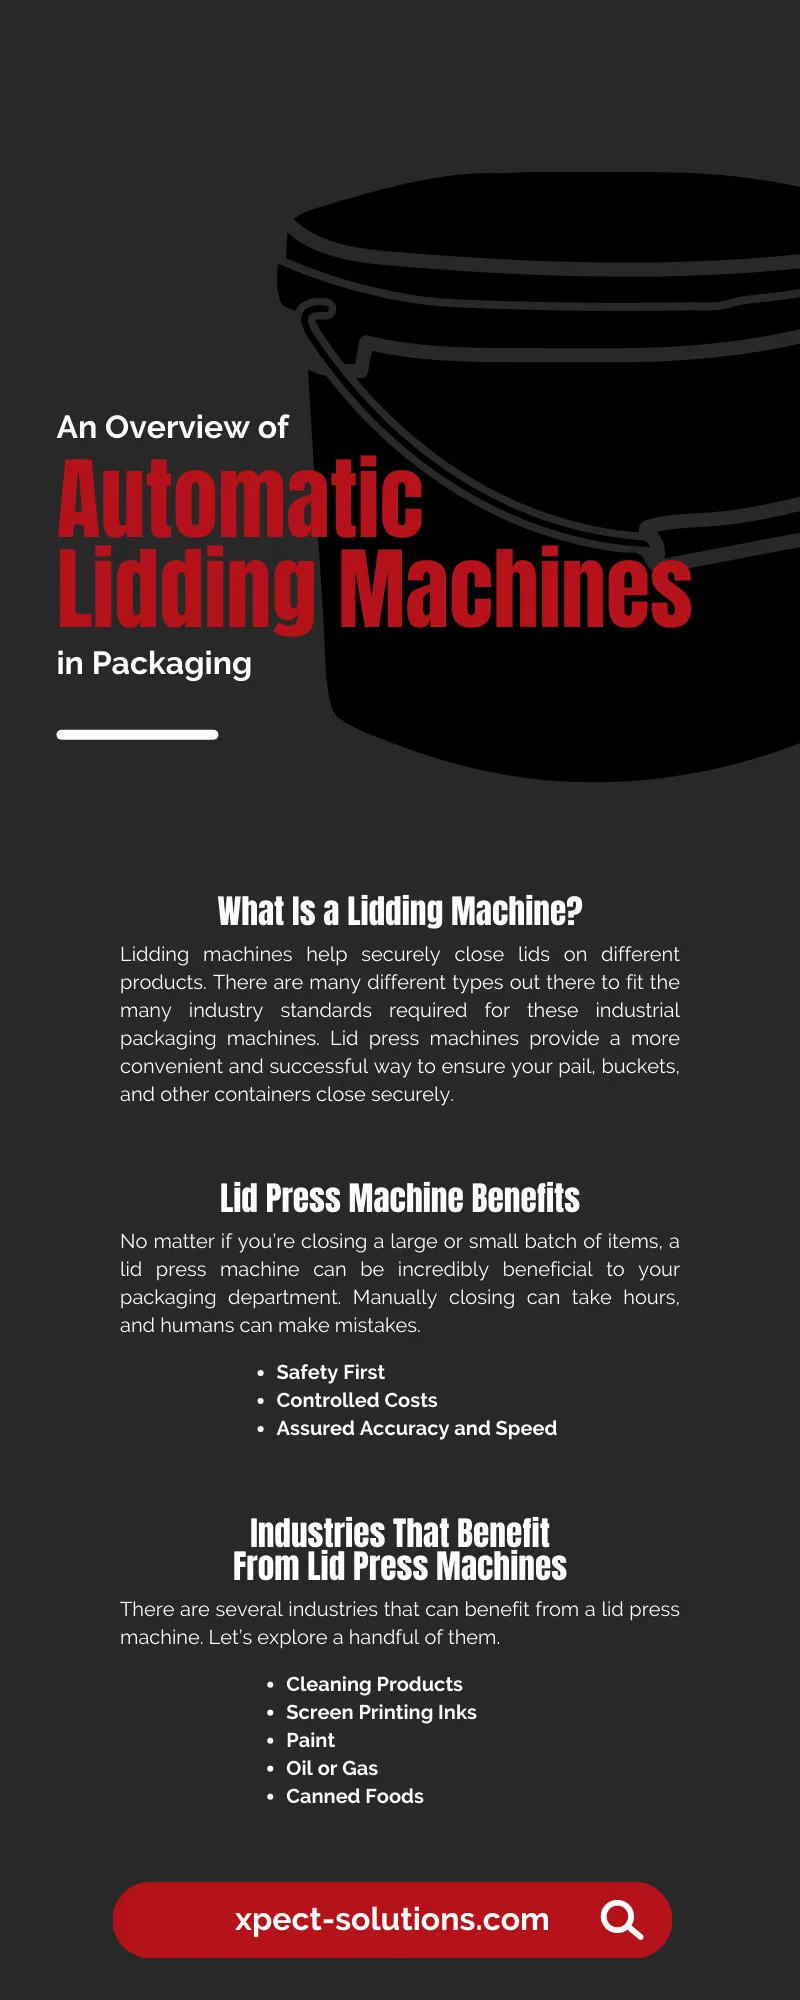 An Overview of Automatic Lidding Machines in Packaging